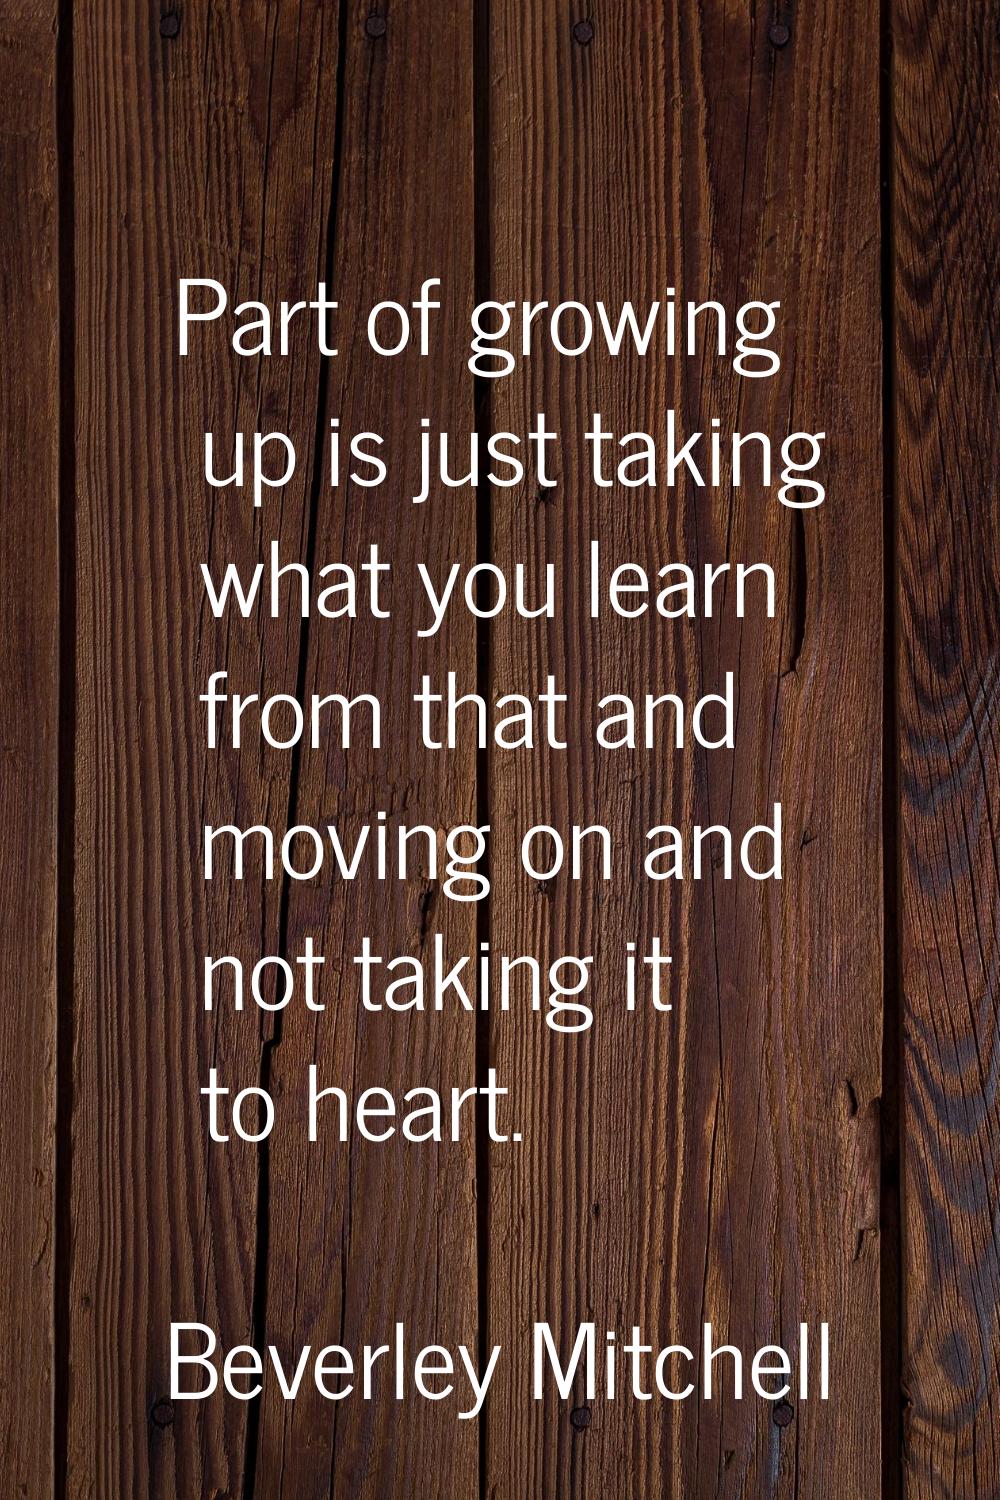 Part of growing up is just taking what you learn from that and moving on and not taking it to heart